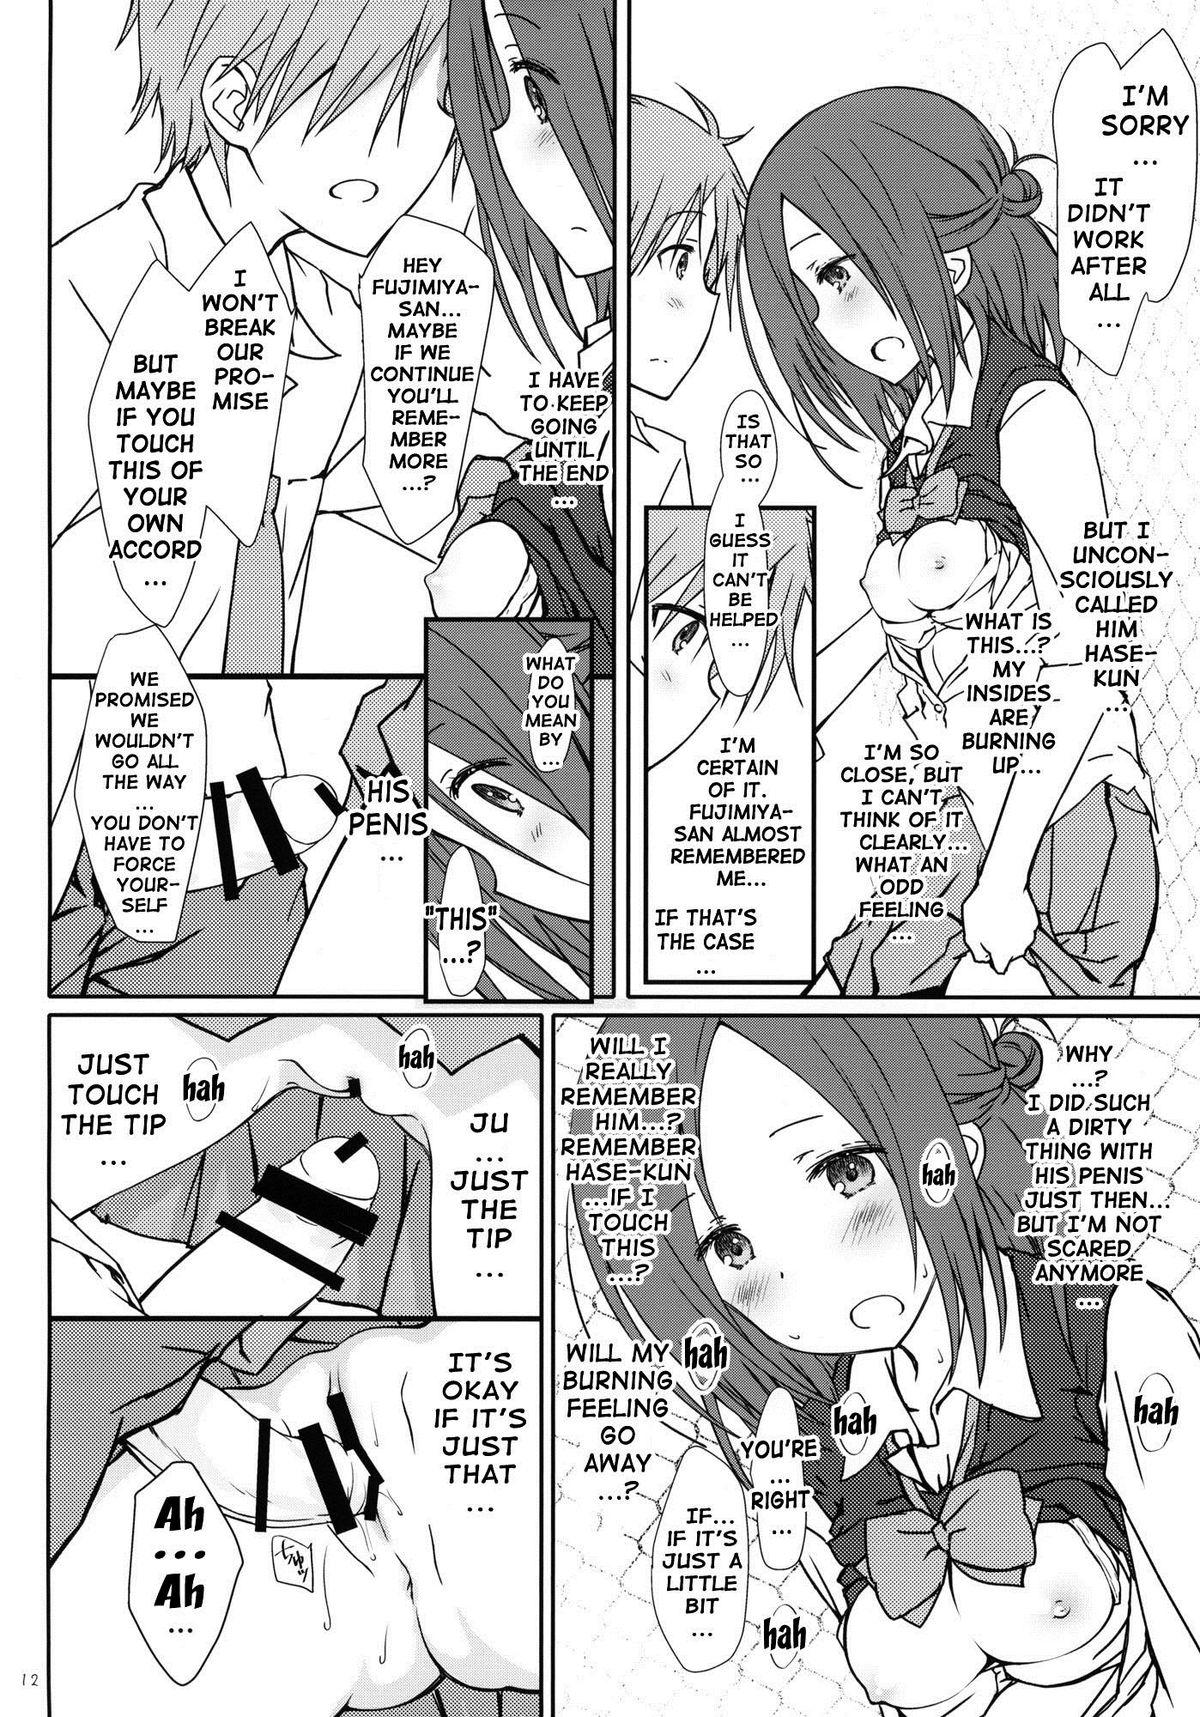 Money Talks "Tomodachi to no Sex." | Sex With Friends - One week friends Best Blowjob - Page 11